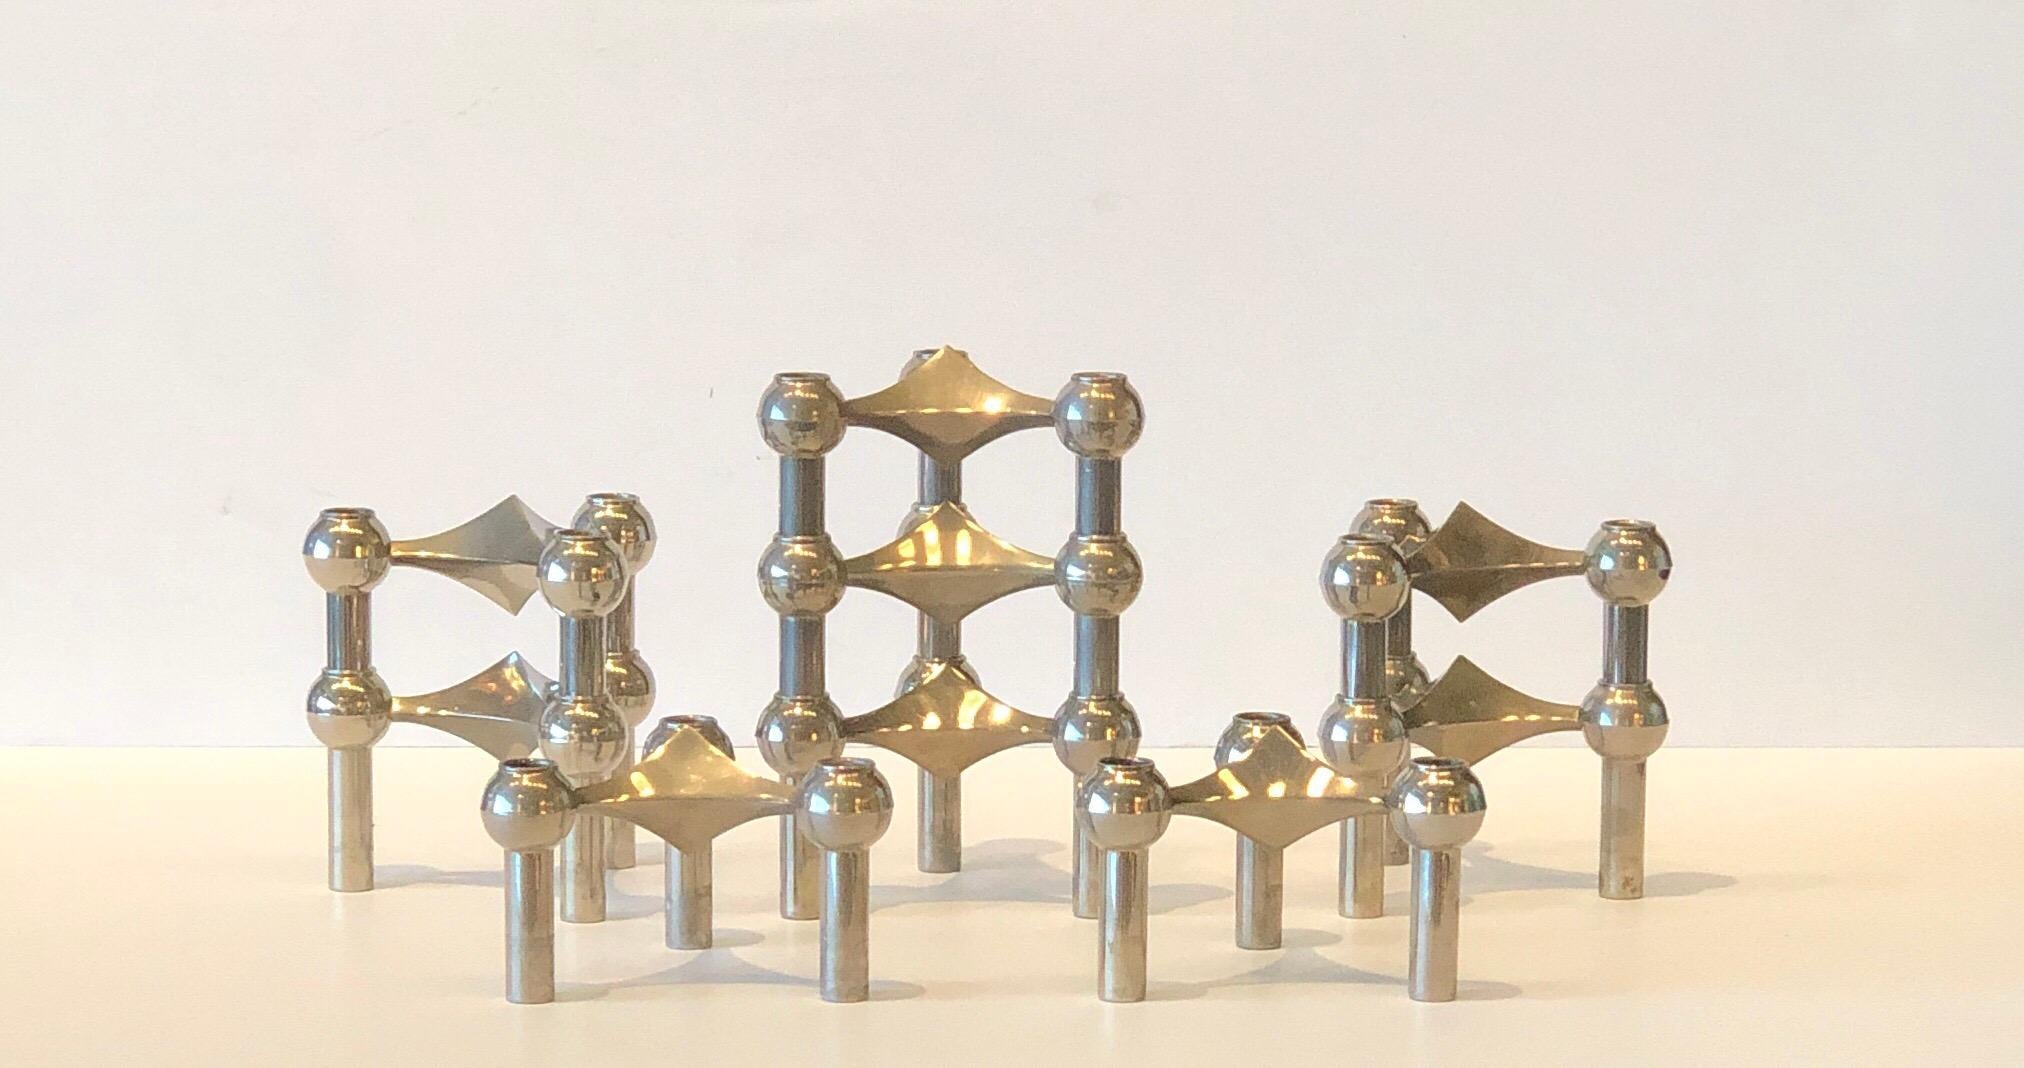 Offered is a set of nine Mid-Century Modern Caesar Stoffi for Fritz Nagel stainless steel stacking candleholders (3 candleholder in each of the 9 holders.) Quite architectural in design and versatile in configuration. Fun to put together in